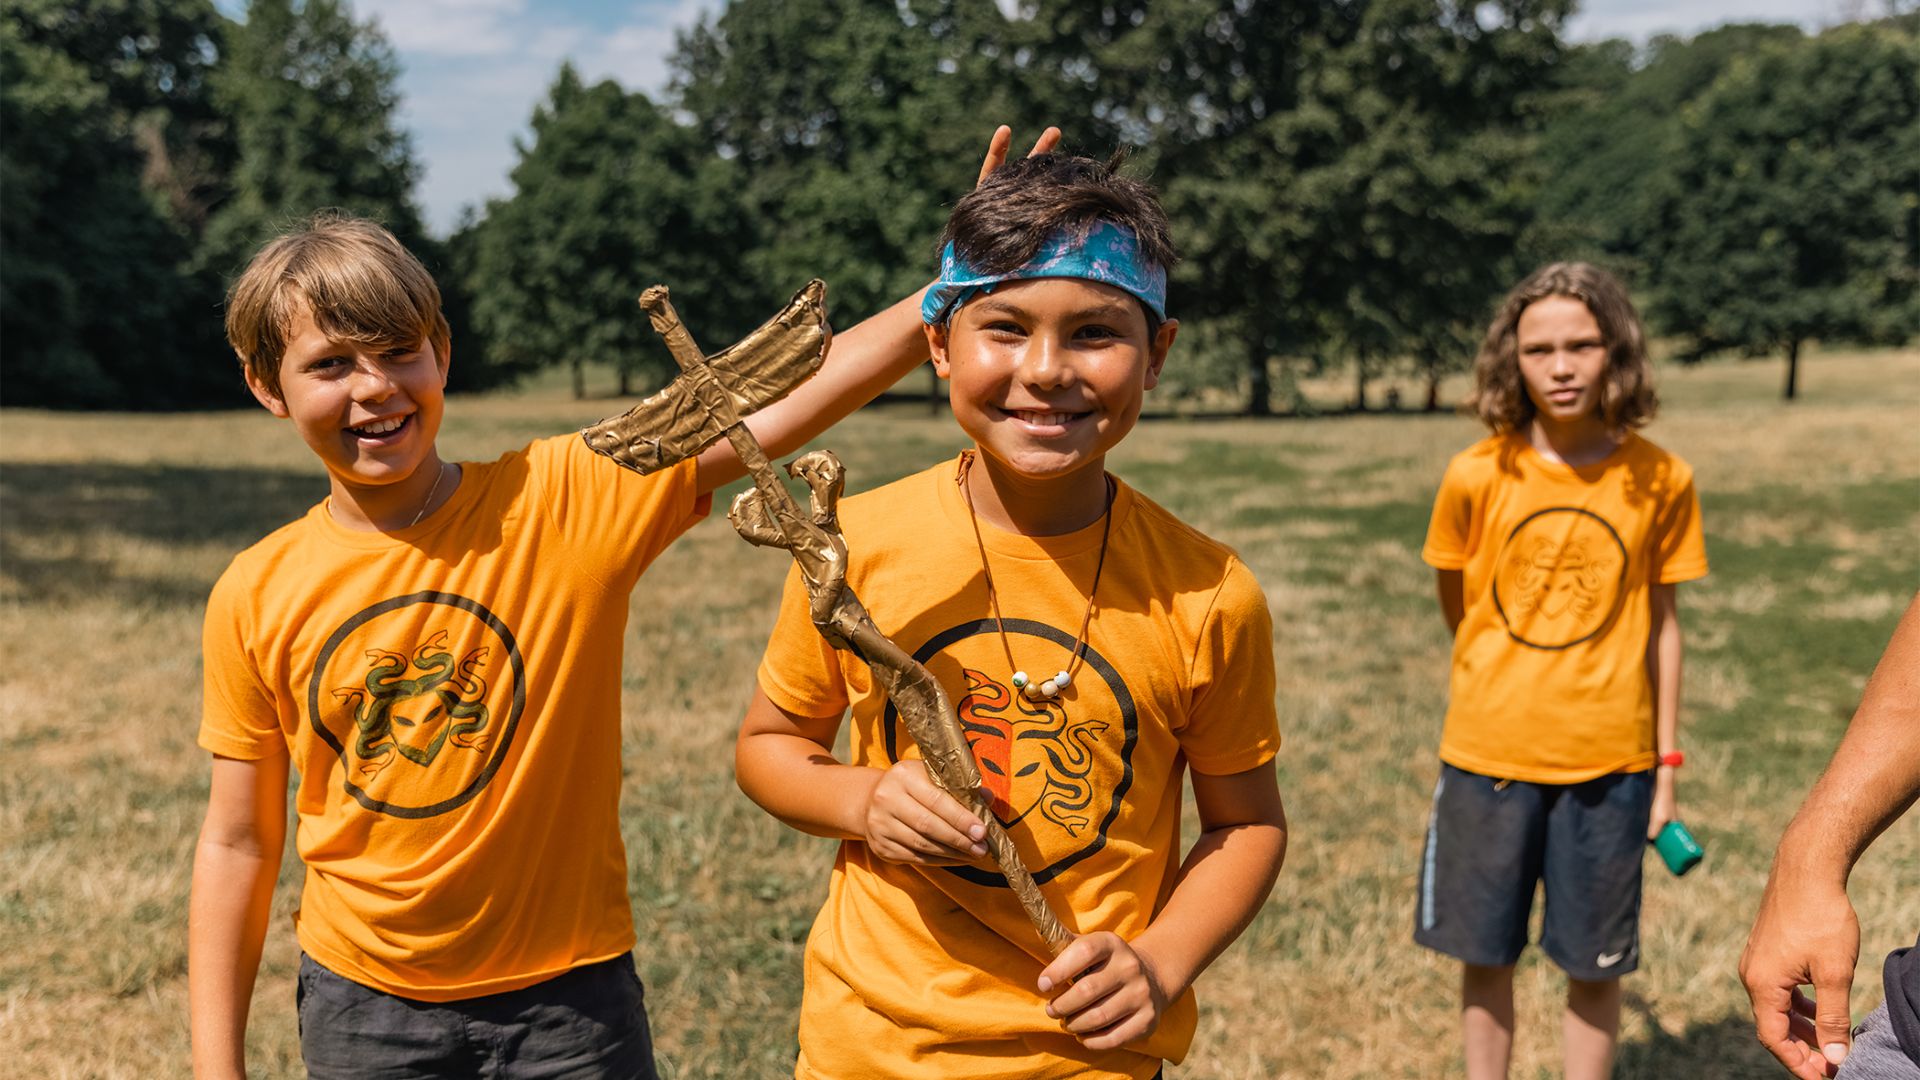 A Percy Jackson-Inspired Experience at Camp Half-Blood this Summer